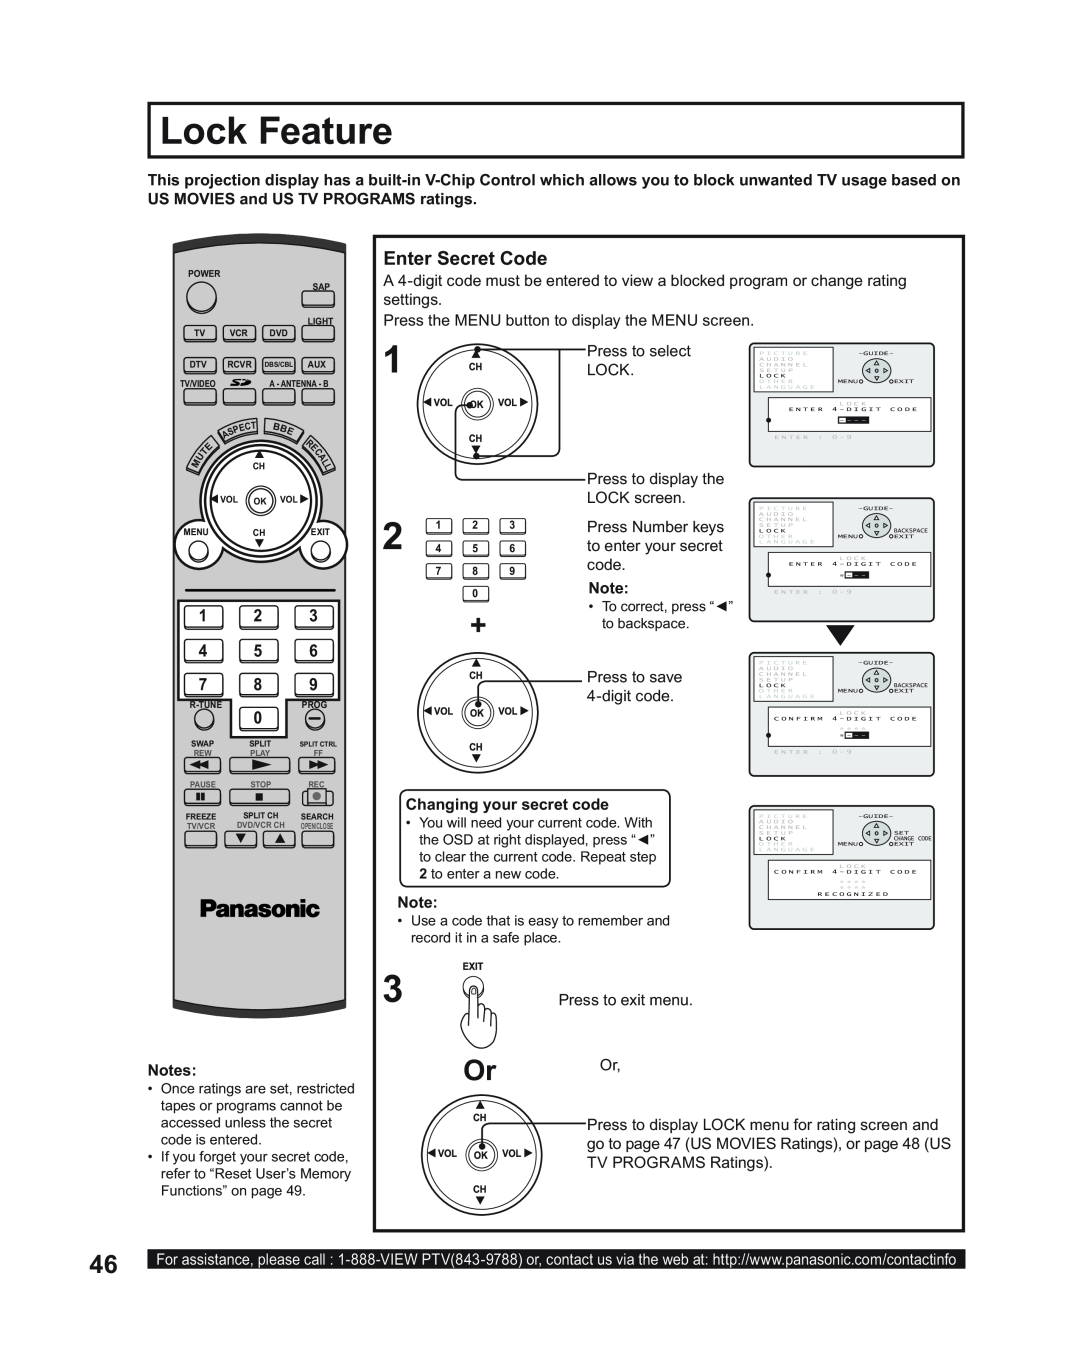 Panasonic PT-50LC14 Lock Feature, Or Or, Enter Secret Code, Press to display the, LOCK screen, Press Number keys, code 